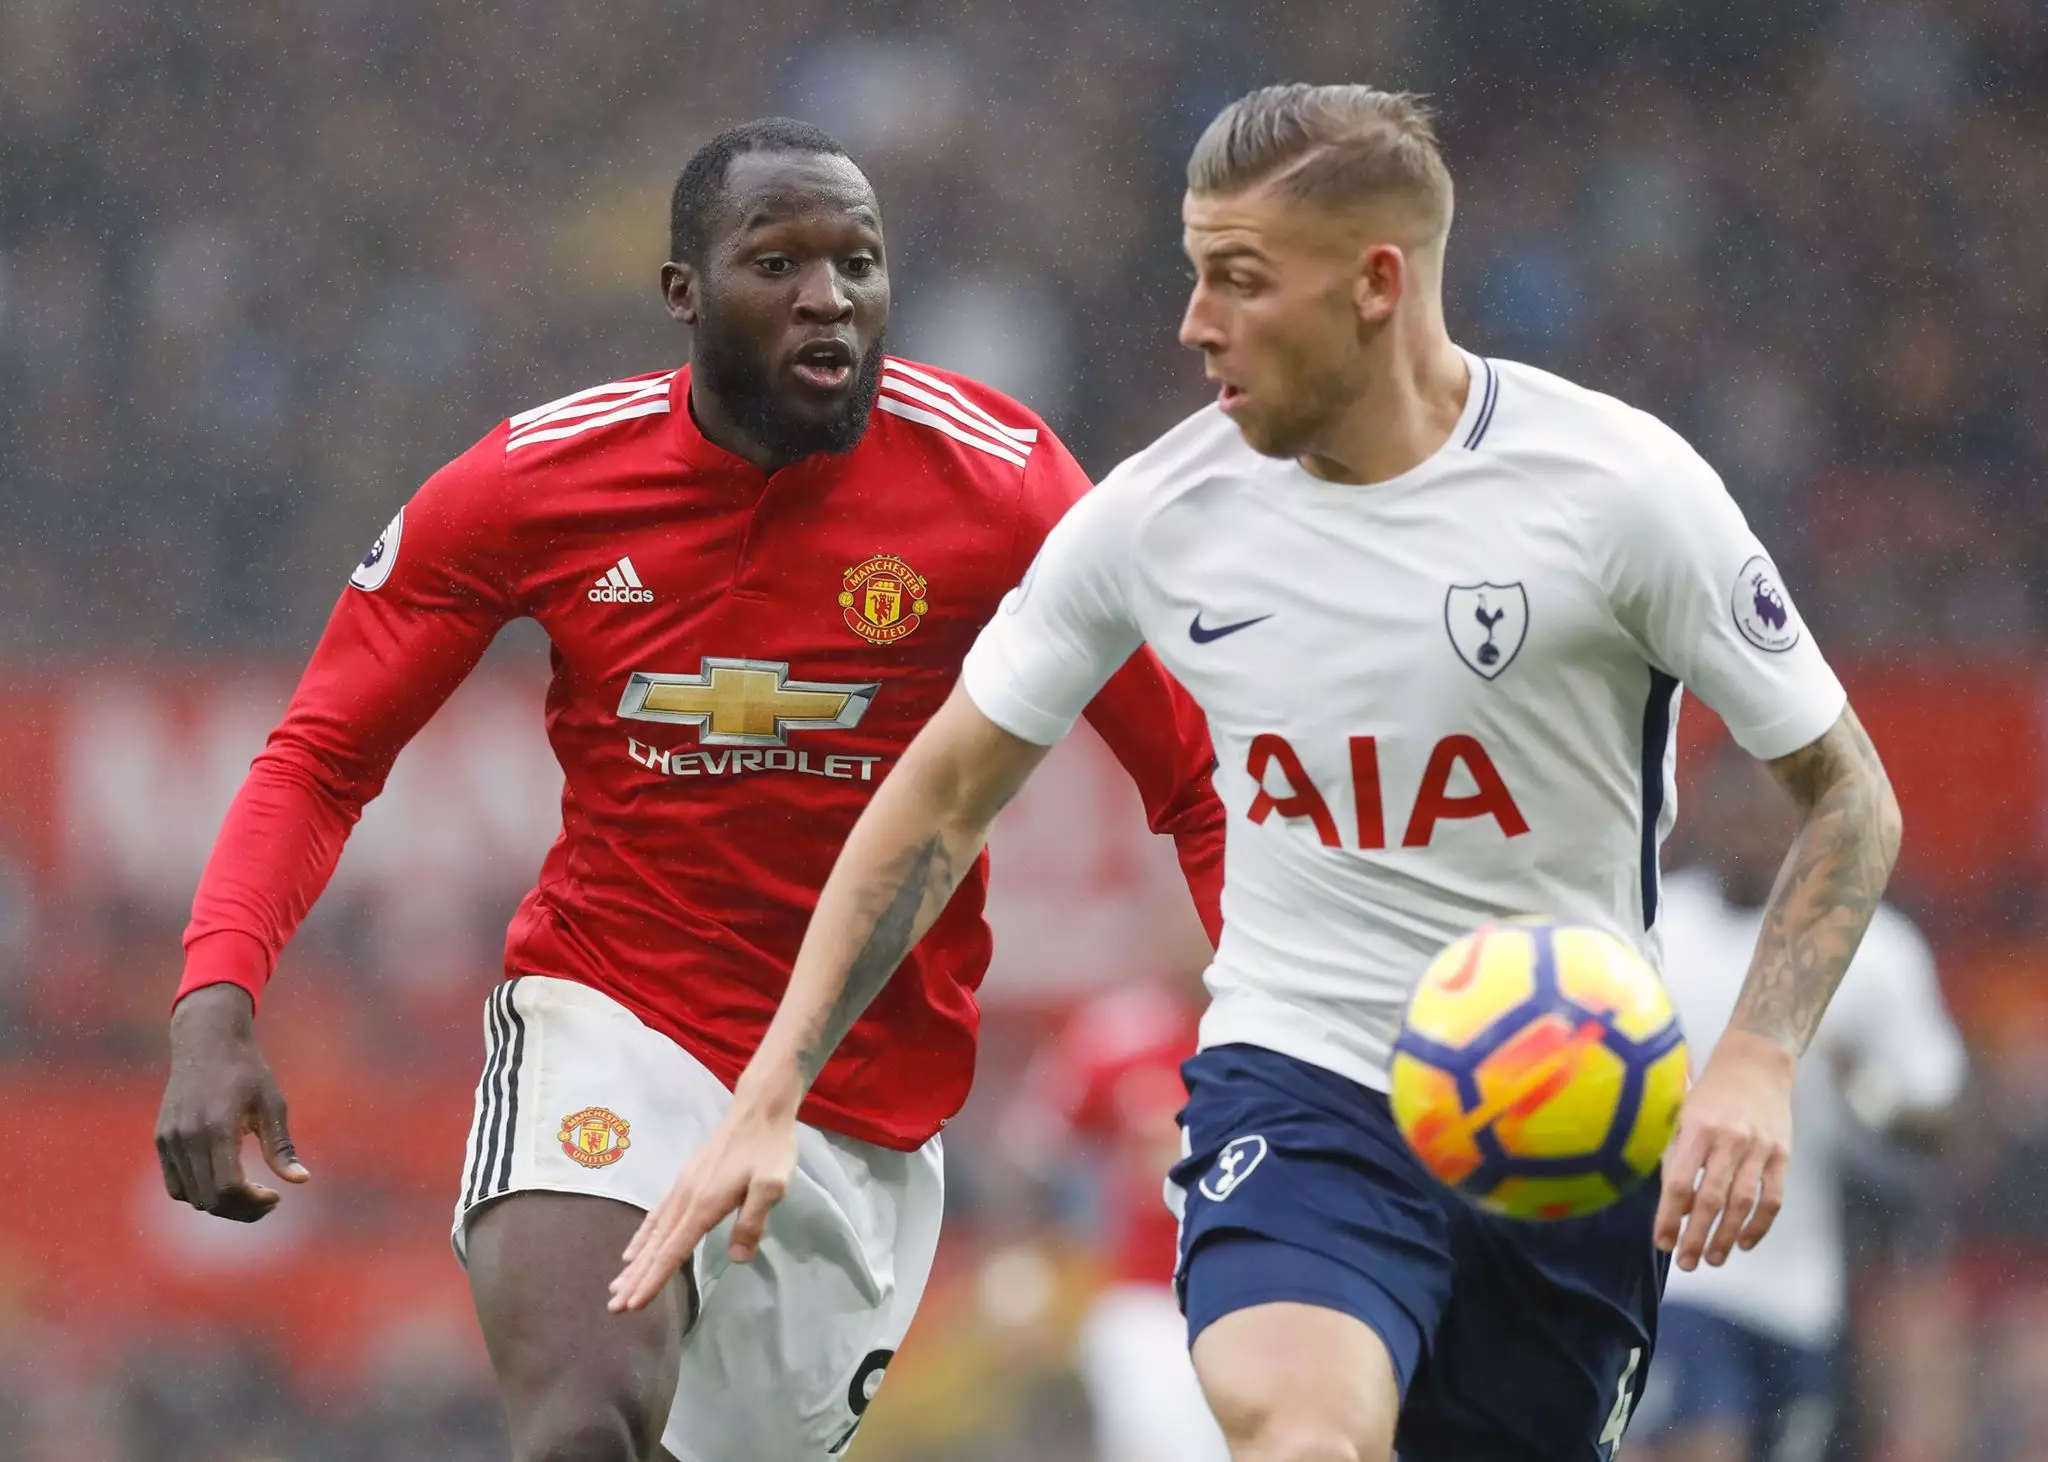 Alderweireld competing against another suitor in United. Image: PA